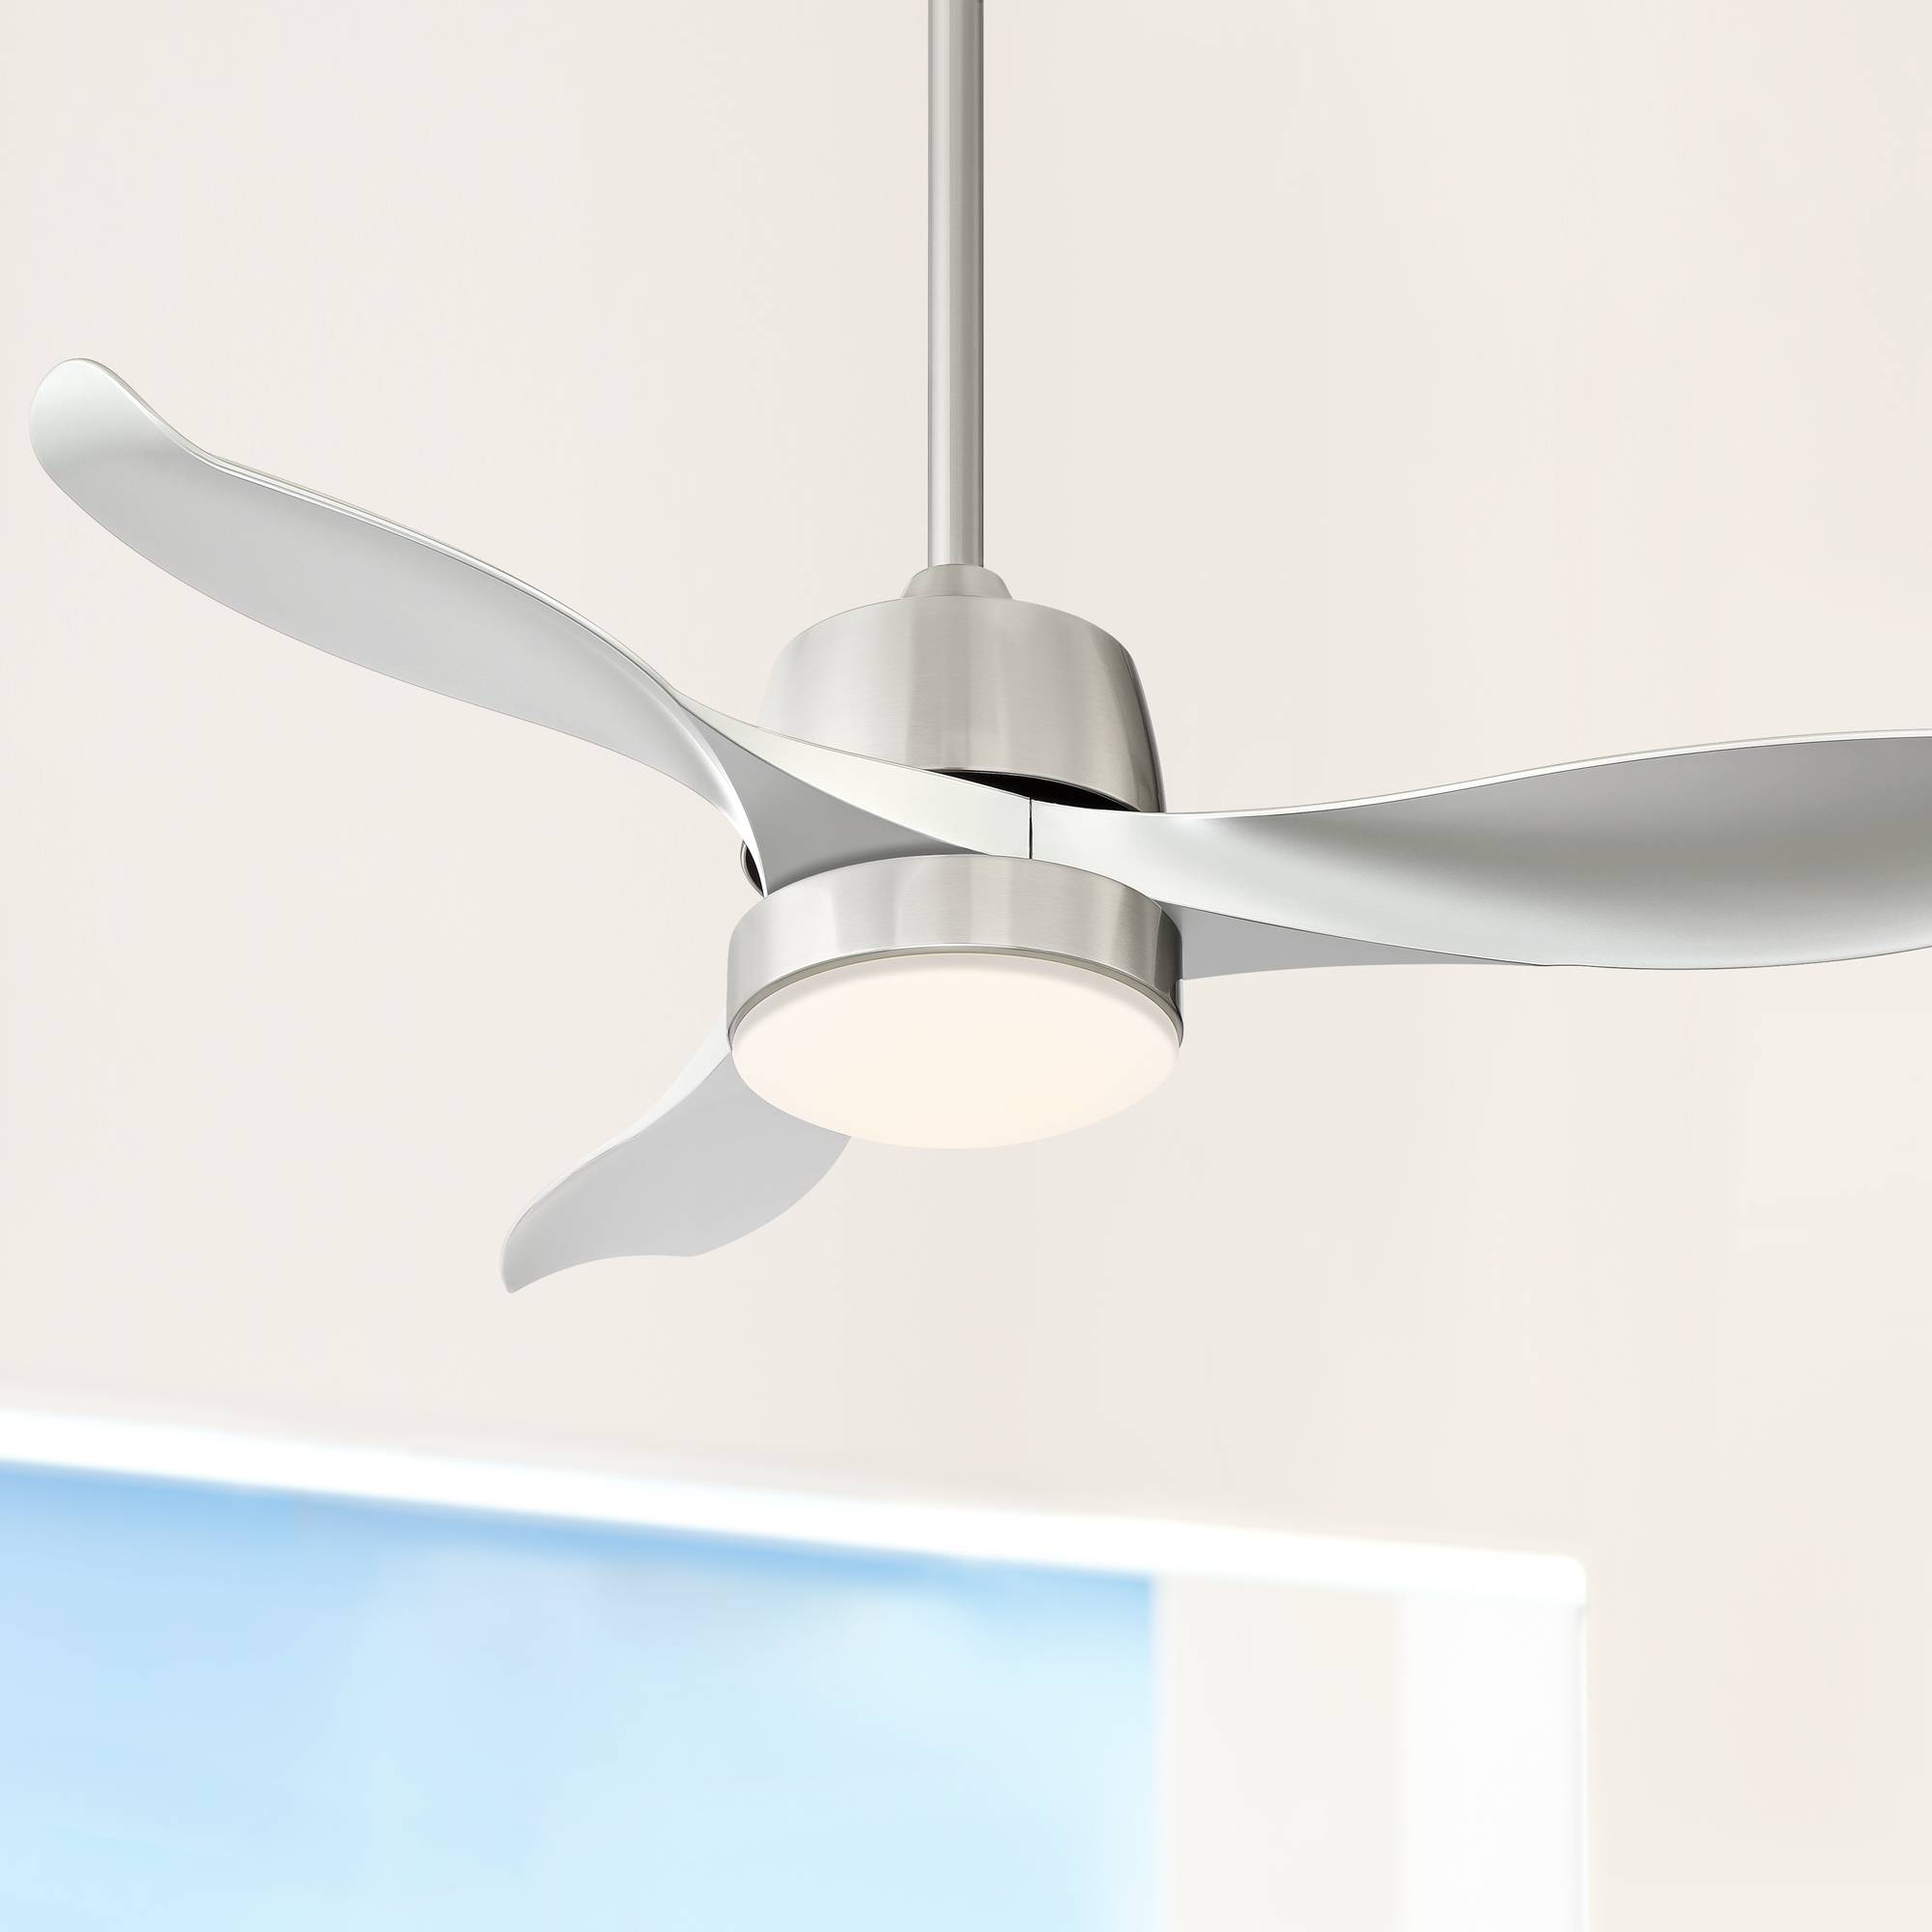 Details About 44 Modern Ceiling Fan With Light Led Remote Brushed Nickel Living Room Kitchen